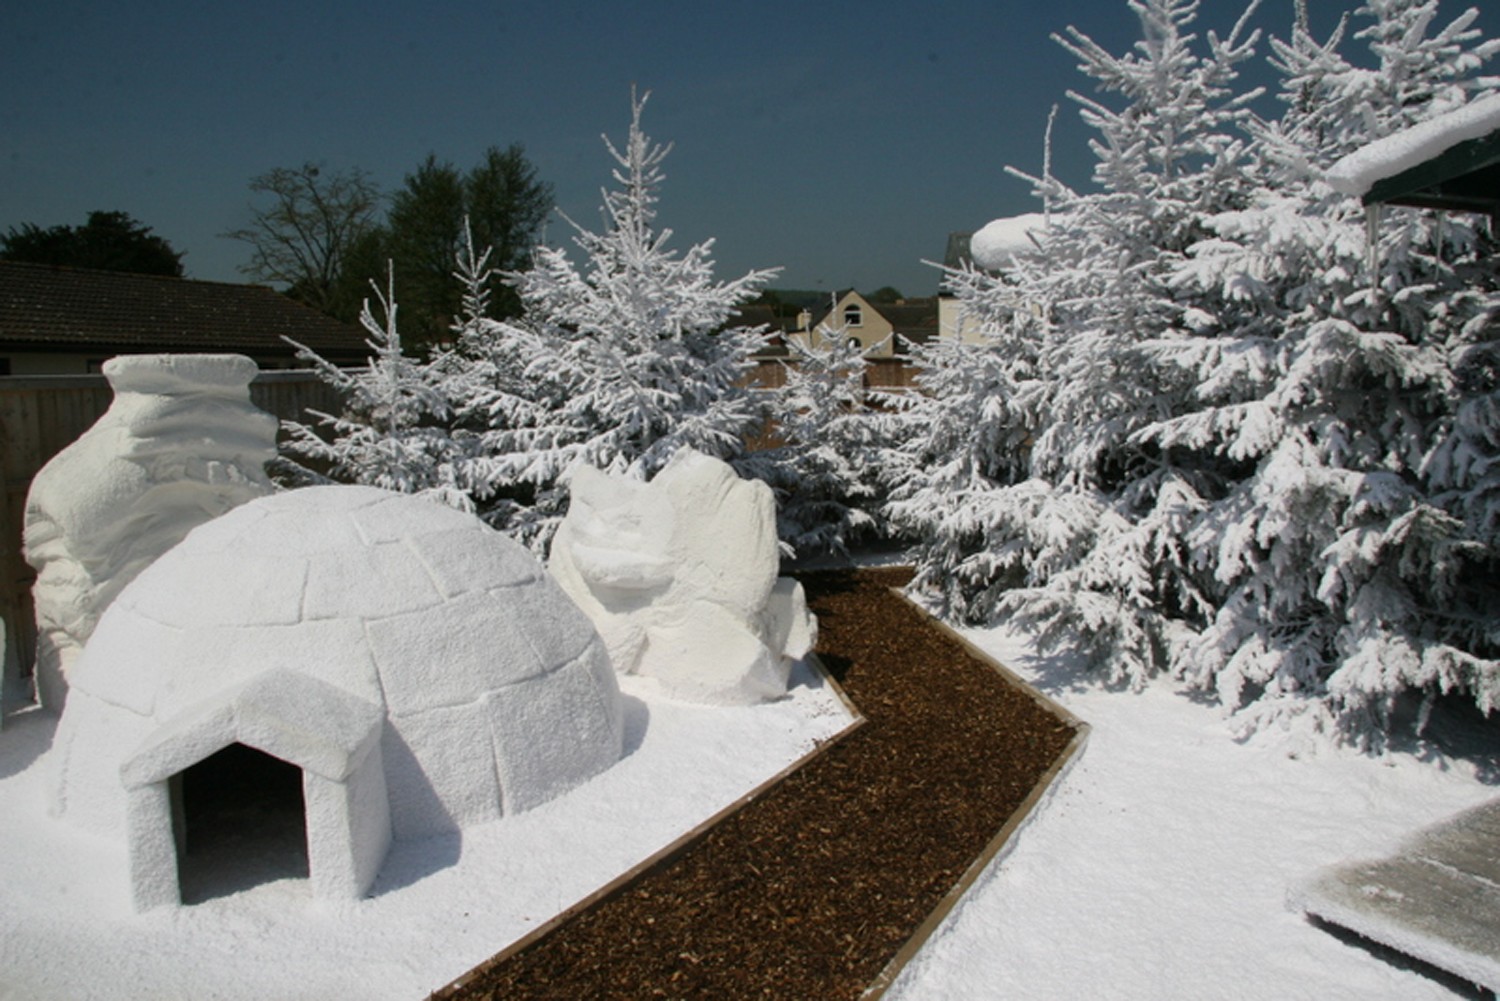 Snow Zone Set Up for Events, Igloo, Falling Snow, Snow Covered Trees and Ground Cover with Eco Friendly Artificial Snow UK, FX Live